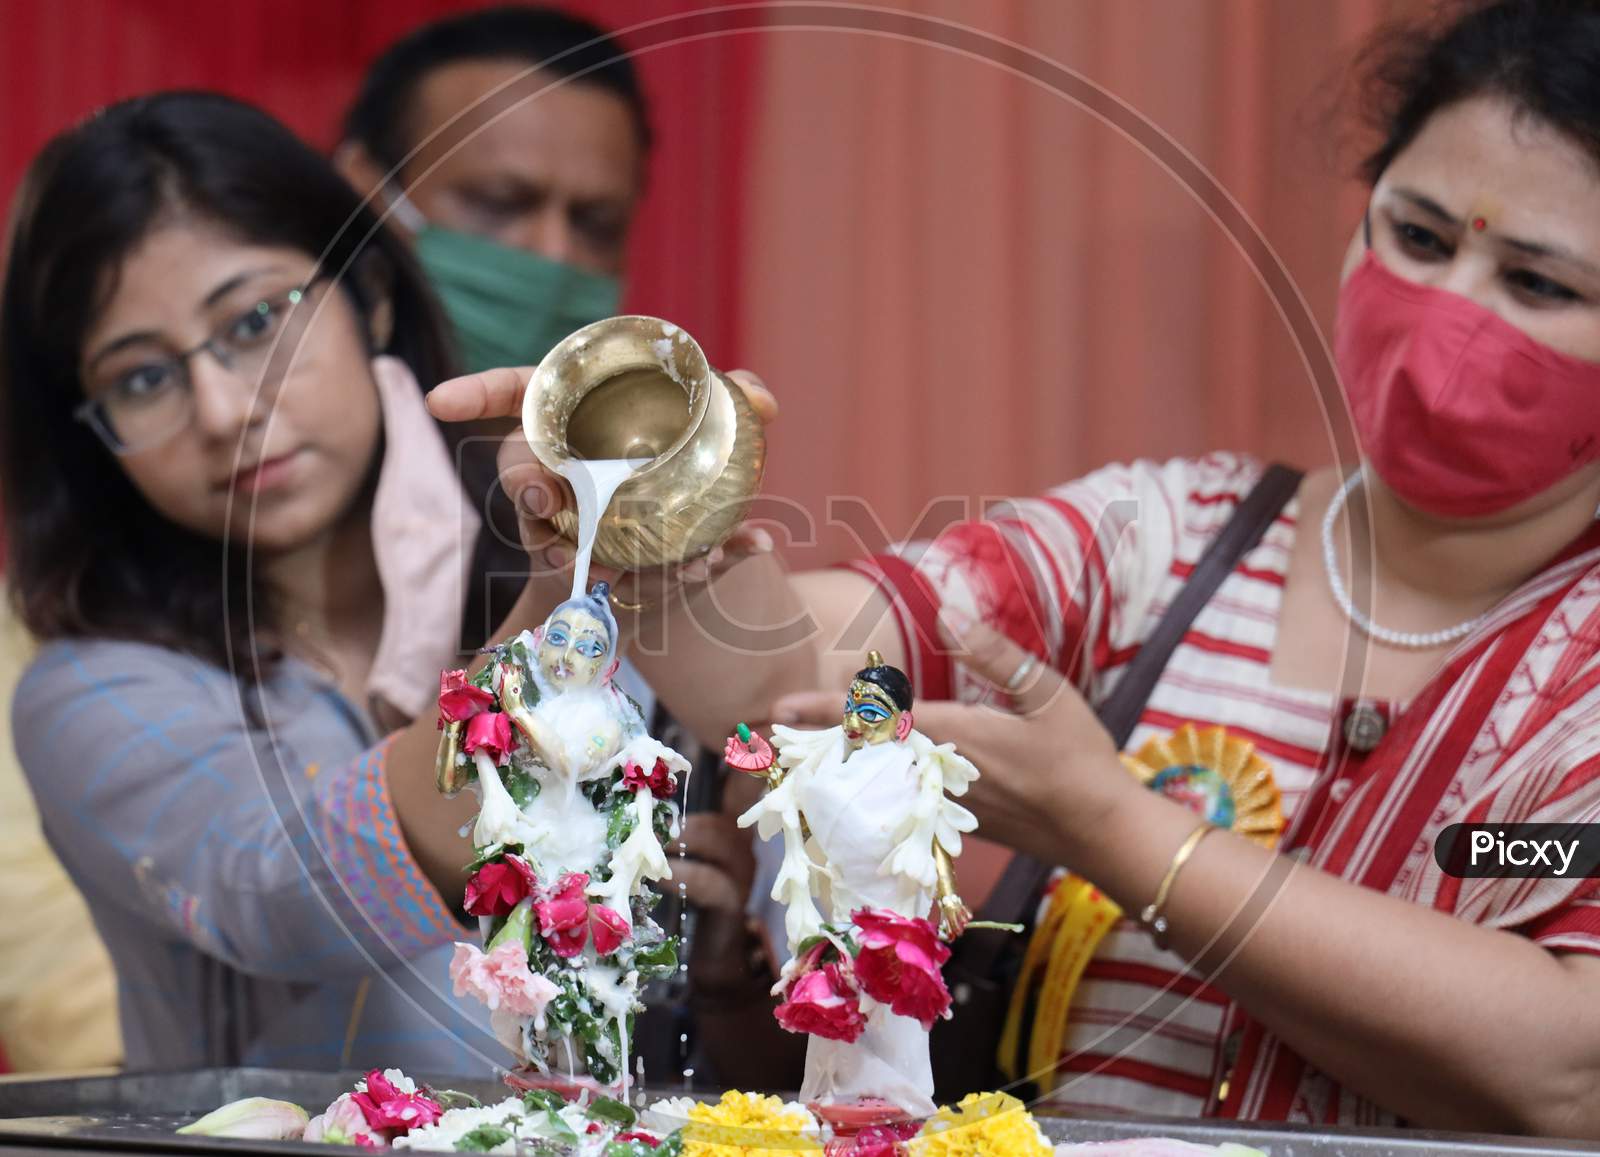 Hindu Devotees Pour Milk Onto The Idol Of Hindu God Lord Krishna On The Occasion Of The 'Janmashtami' Festival Celebrations Marking Krishna's Birth, At ISKCON Temple In New Delhi On August 12, 2020